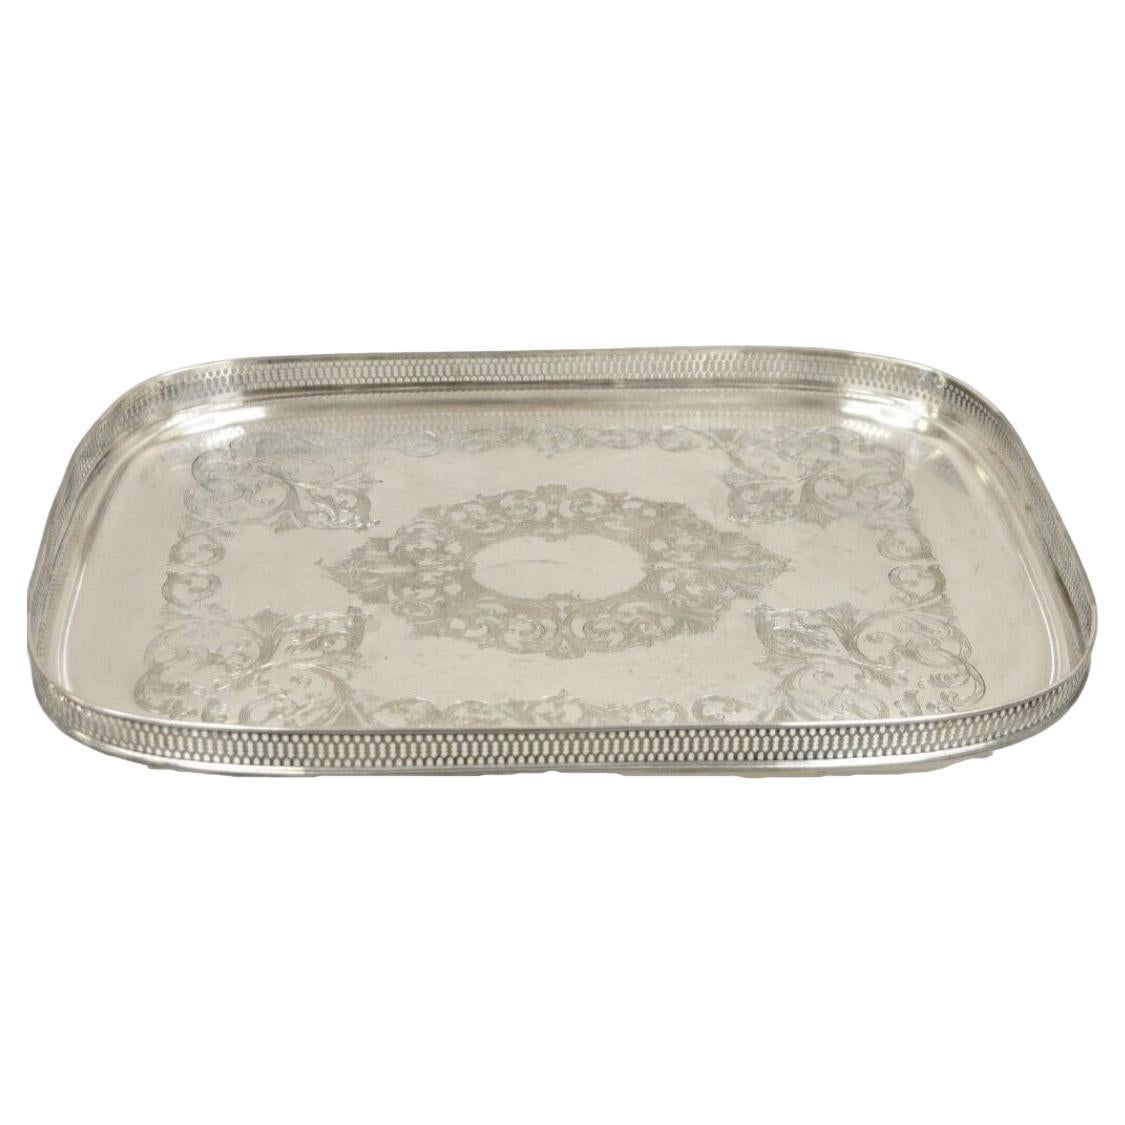 Vintage English Victorian LBS CO Superfine Silver Plated Tray with Gallery (a) Gallery